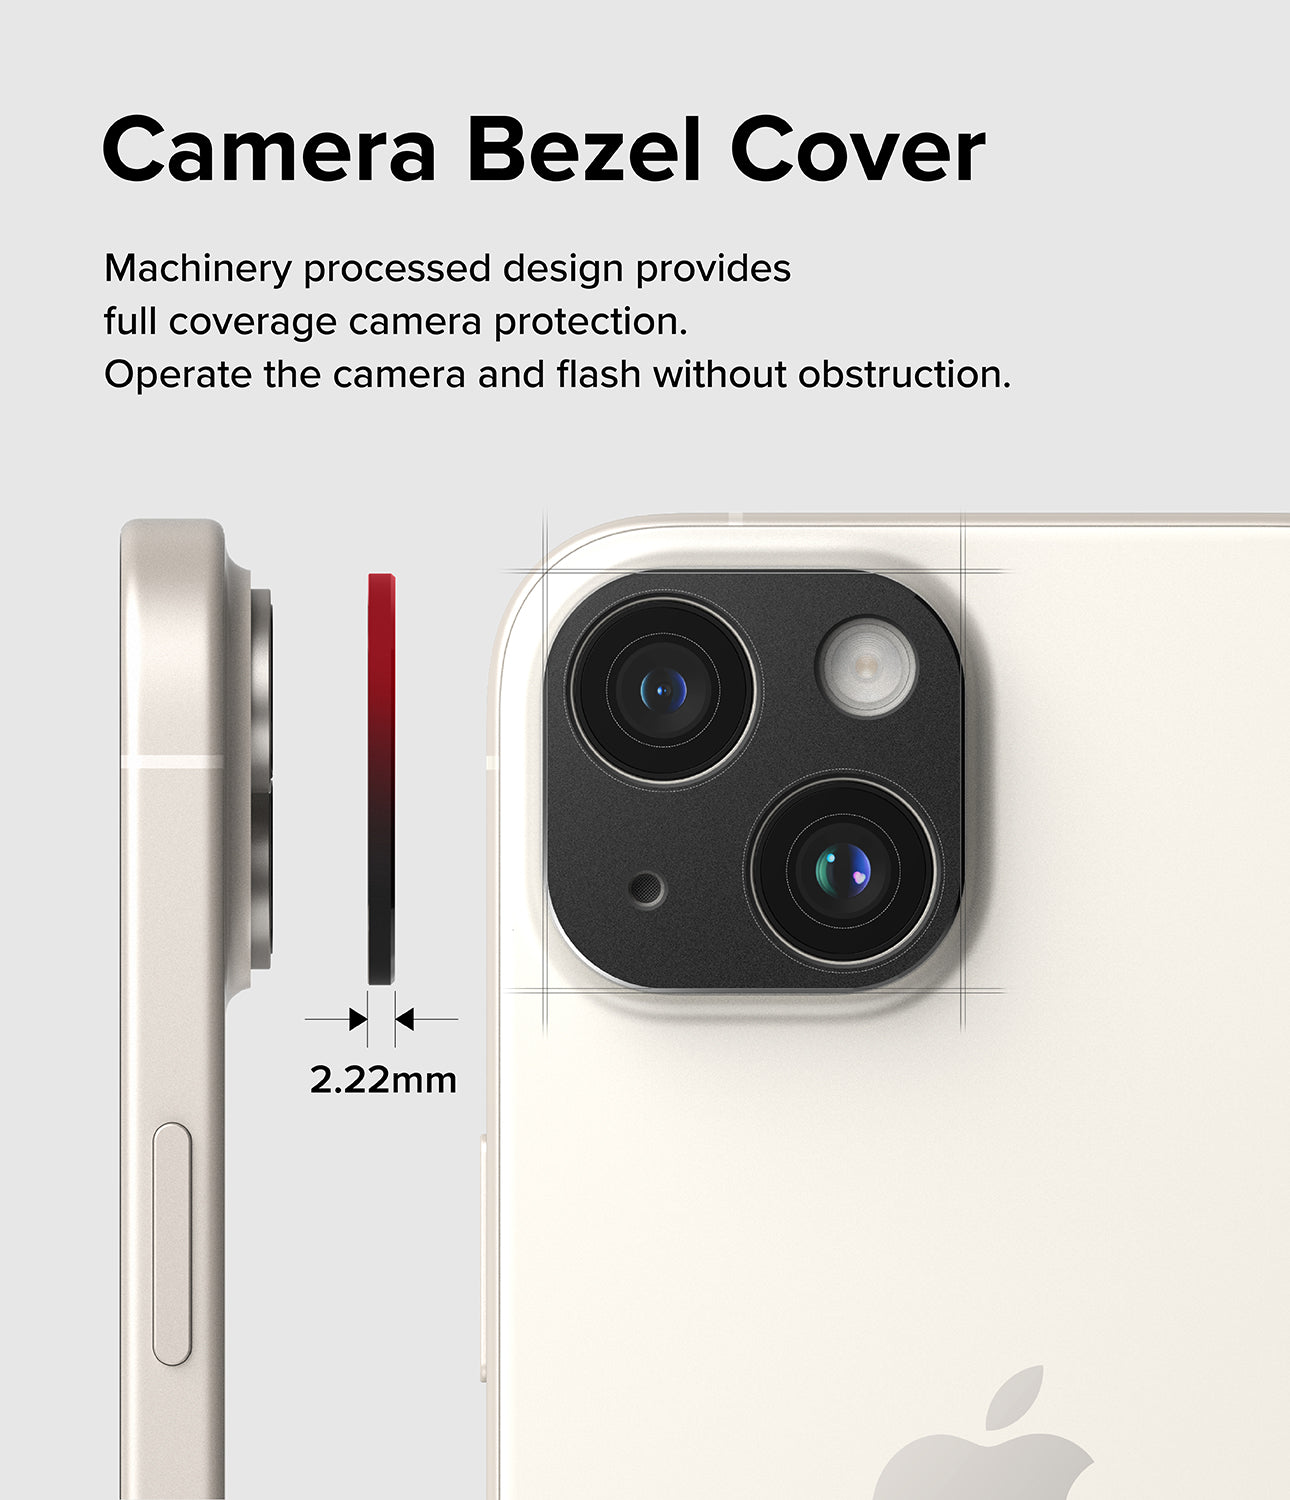 iPhone 15 Plus / iPhone 15 | Camera Styling - Black aluminum metallic cover. Camera Bezel Cover. Machinery processed design provides full coverage camera option. Operate the camera and flash without obstruction.